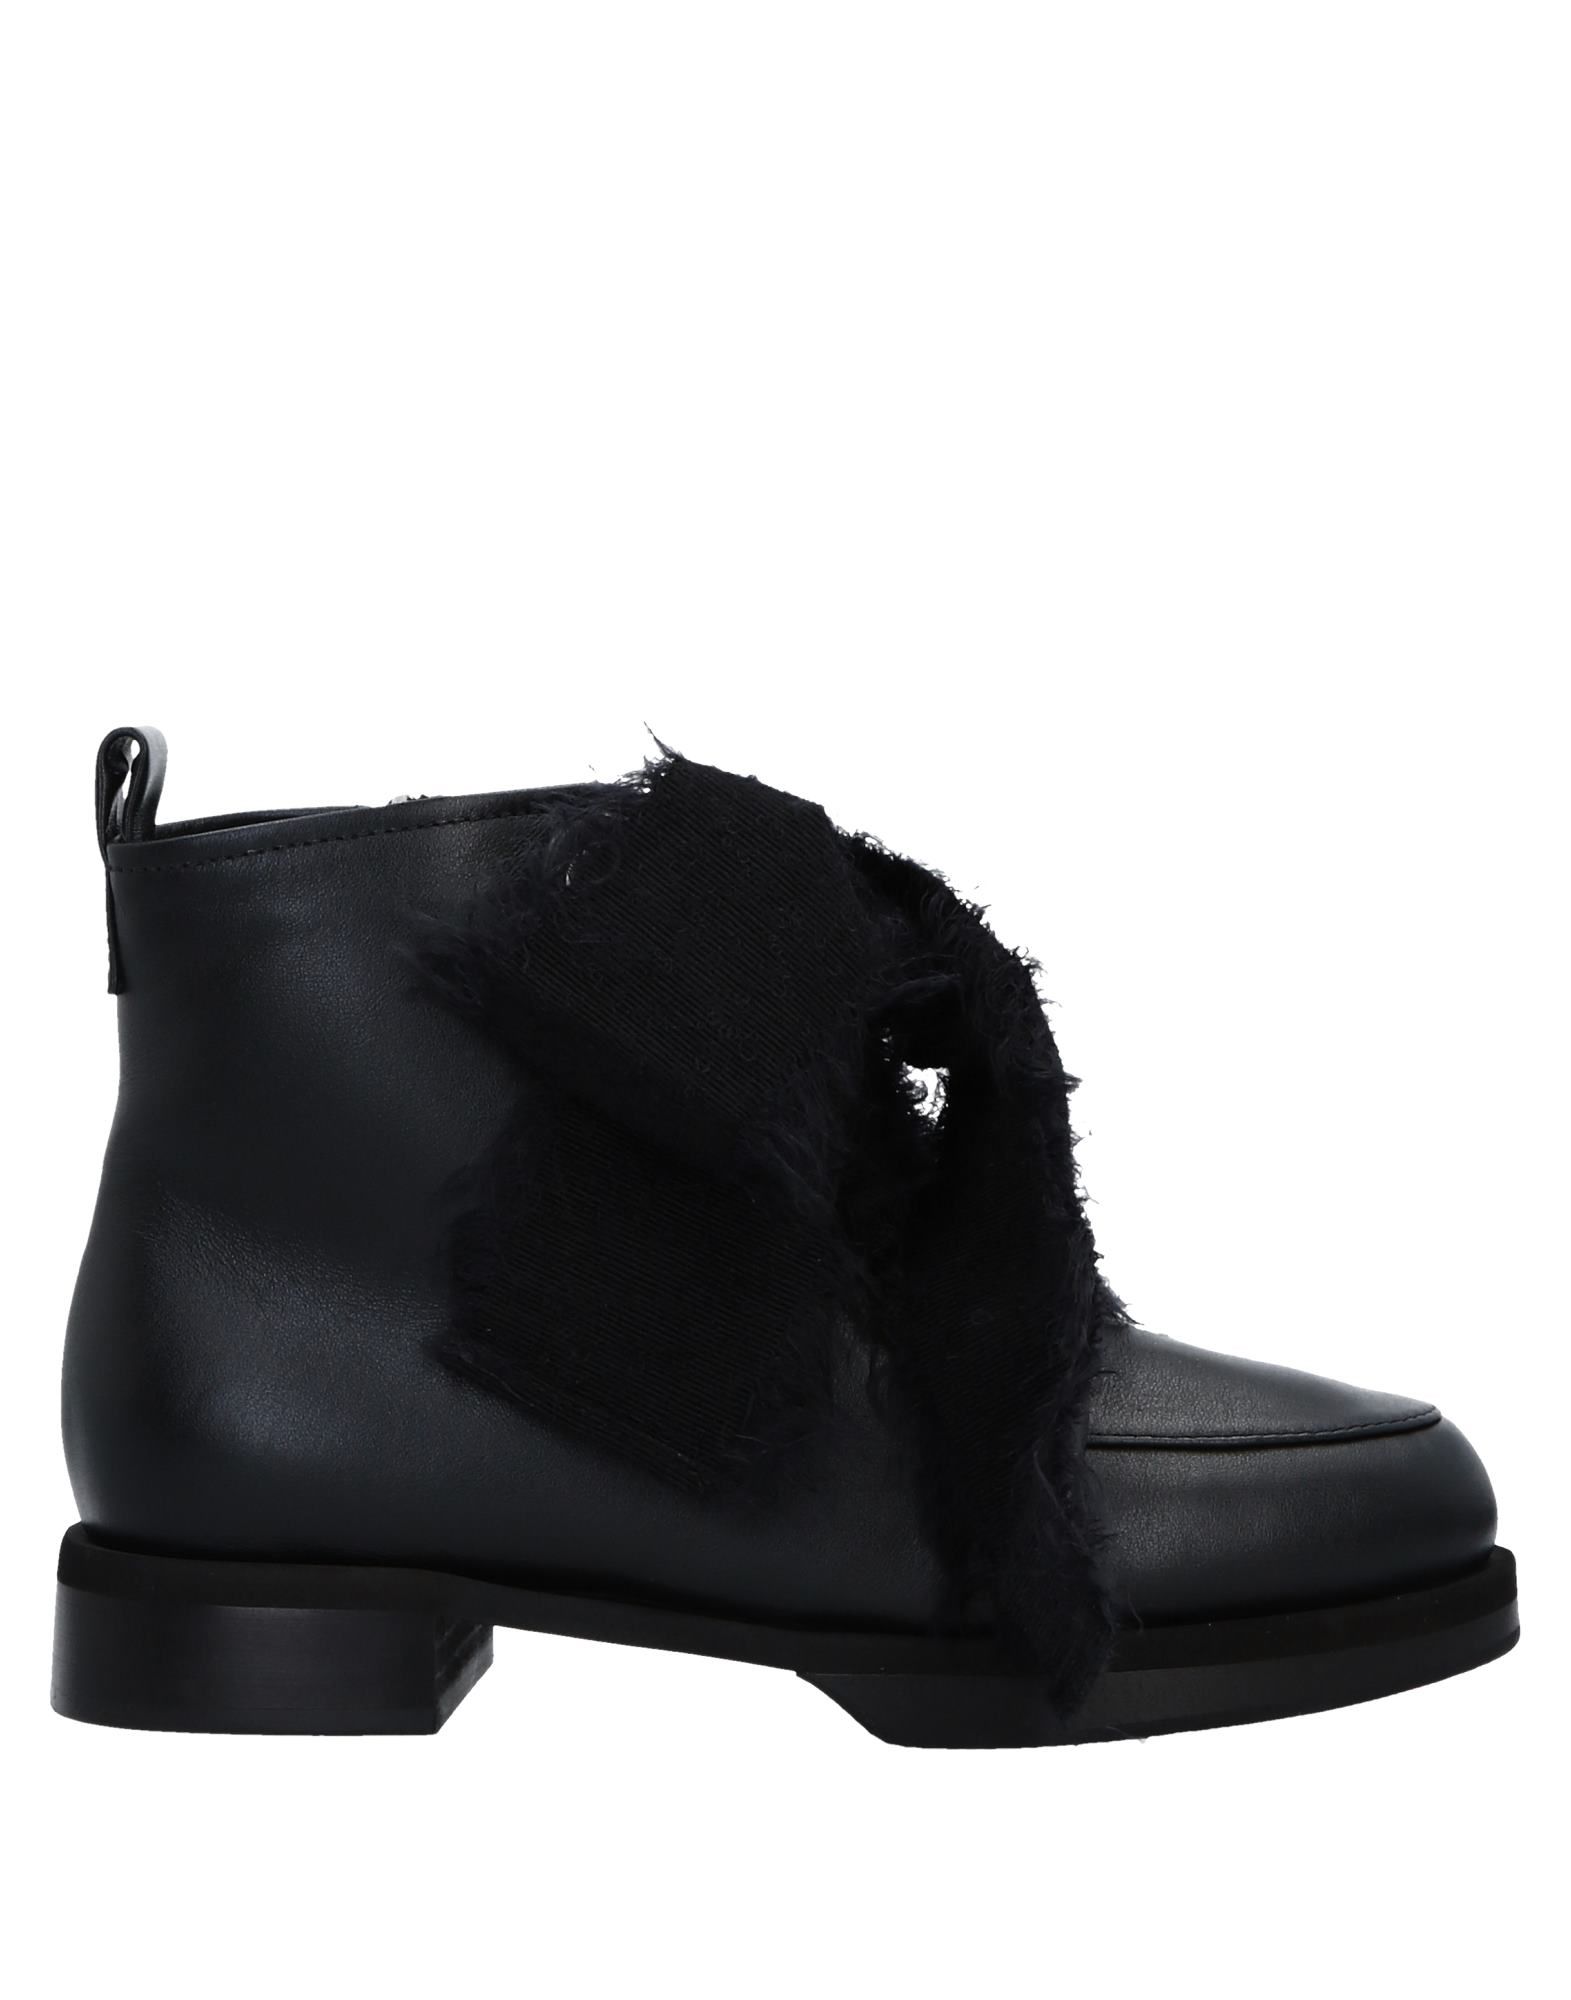 GREYMER Ankle boot,11513974OI 7